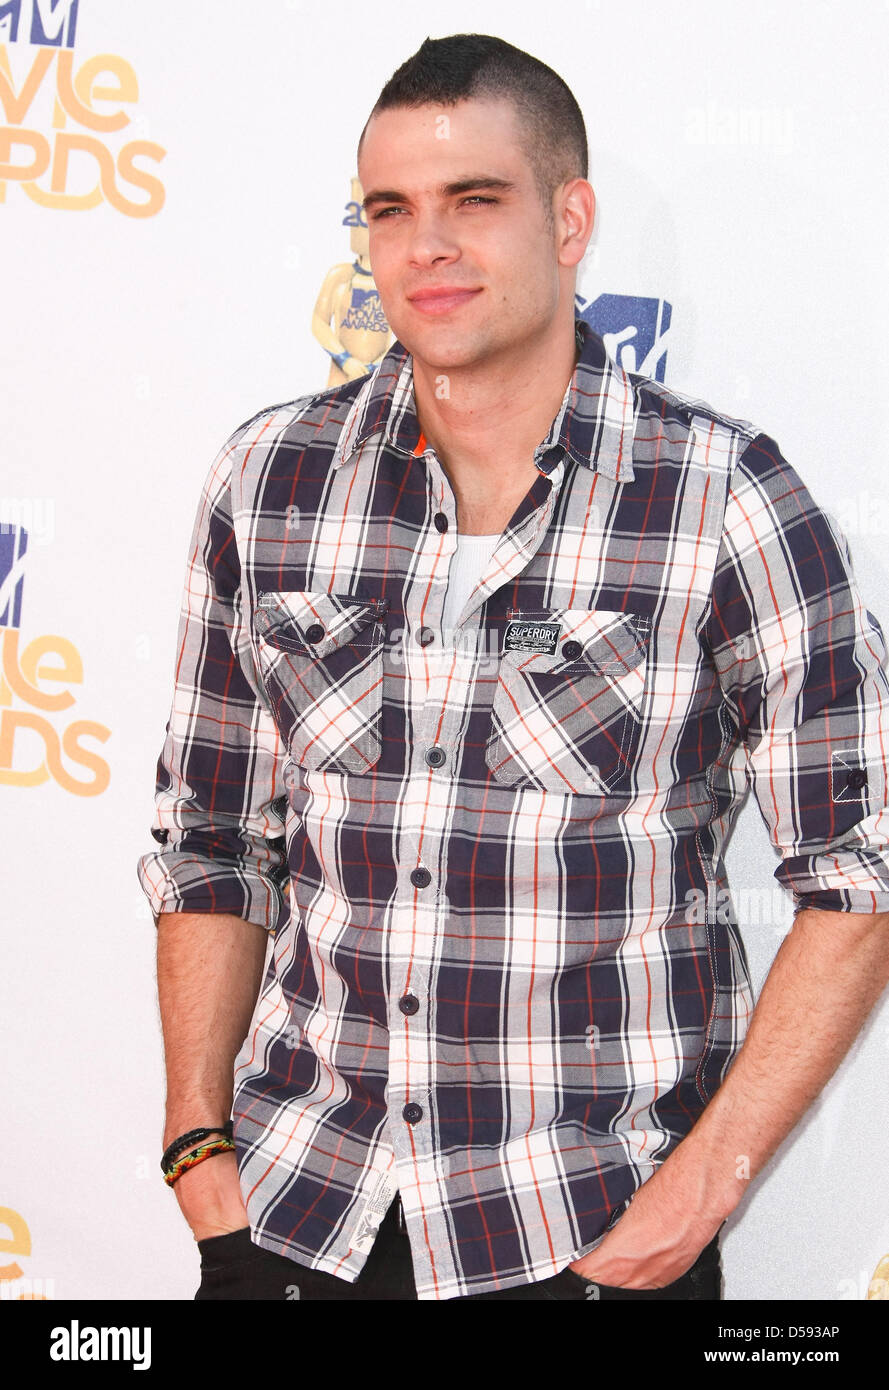 Actor and musician Mark Salling arrives for the 2010 MTV Movie Awards at Gibson Amphitheatre at Universal Studies in Universal City, California, USA, 06 June 2010. The movies are nominated by producers and executives from MTV and the winners are chosen on-line by the general public. Photo: Hubert Boesl Stock Photo